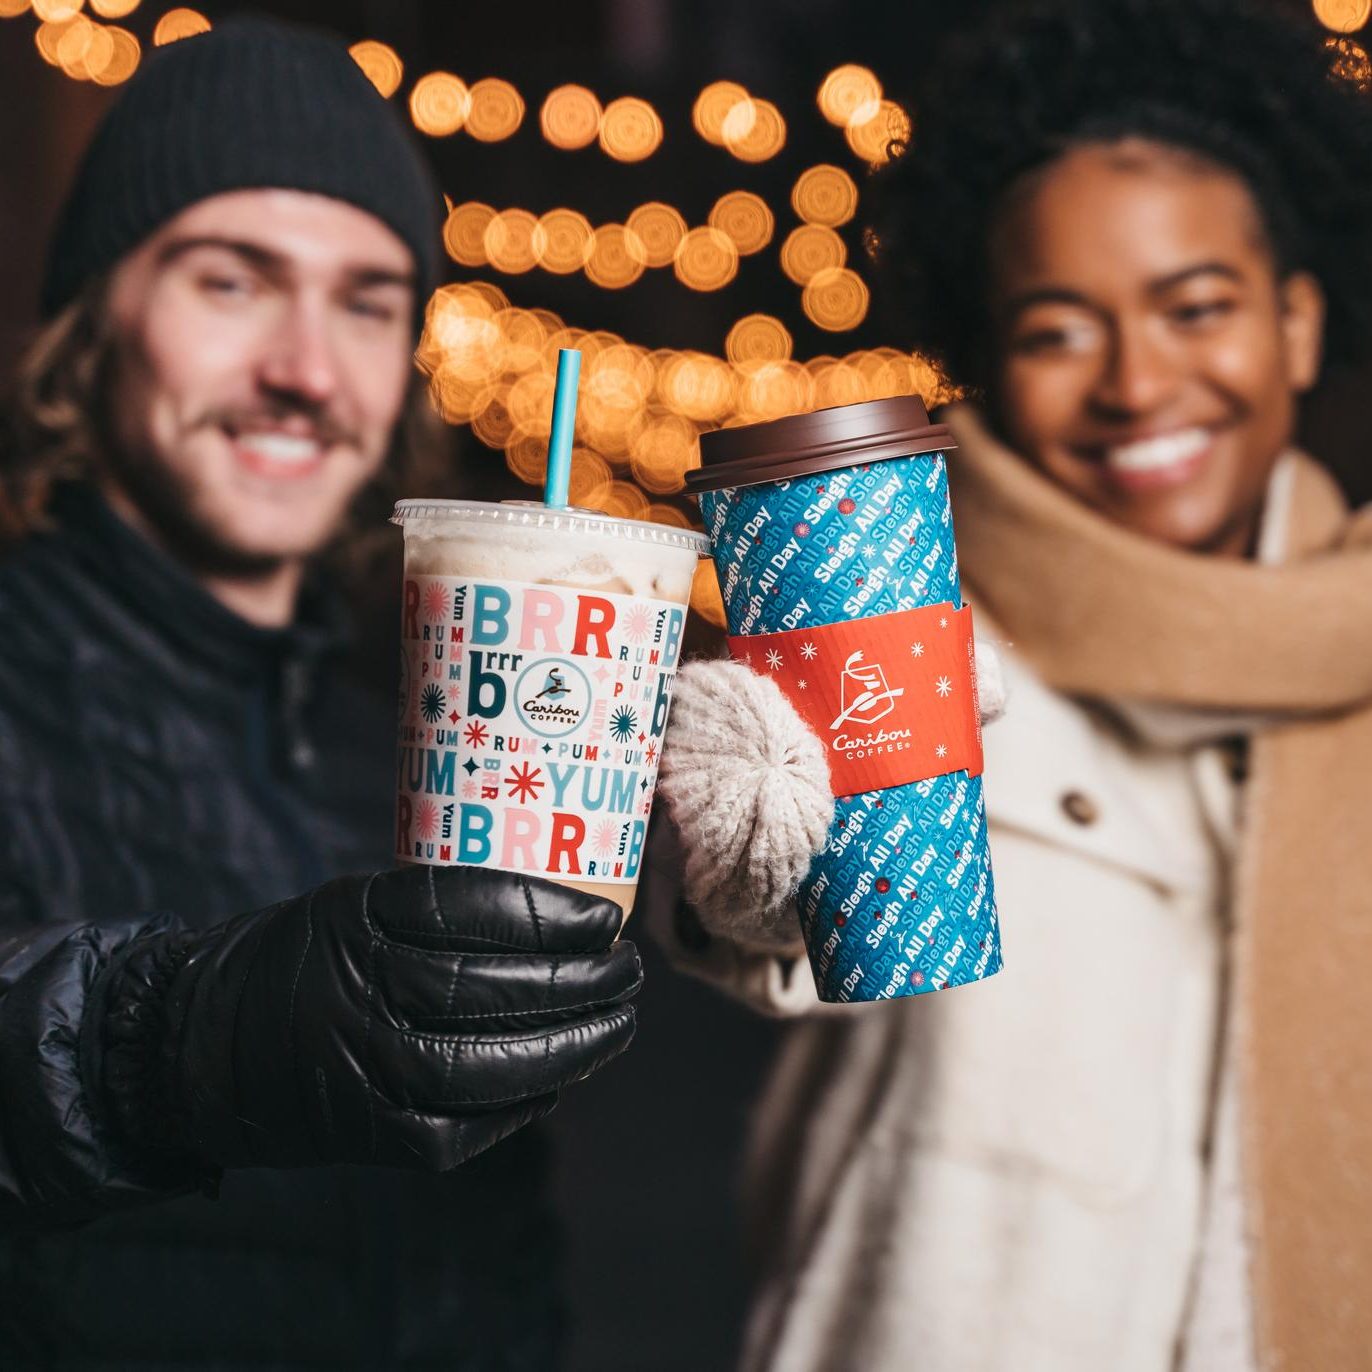 Two people holding Caribou Coffee Holiday cups, one cold cup, one hot. The cups say "Brrrum Pum Pum Yum" and "Sleigh All Day" as part of a pattern.